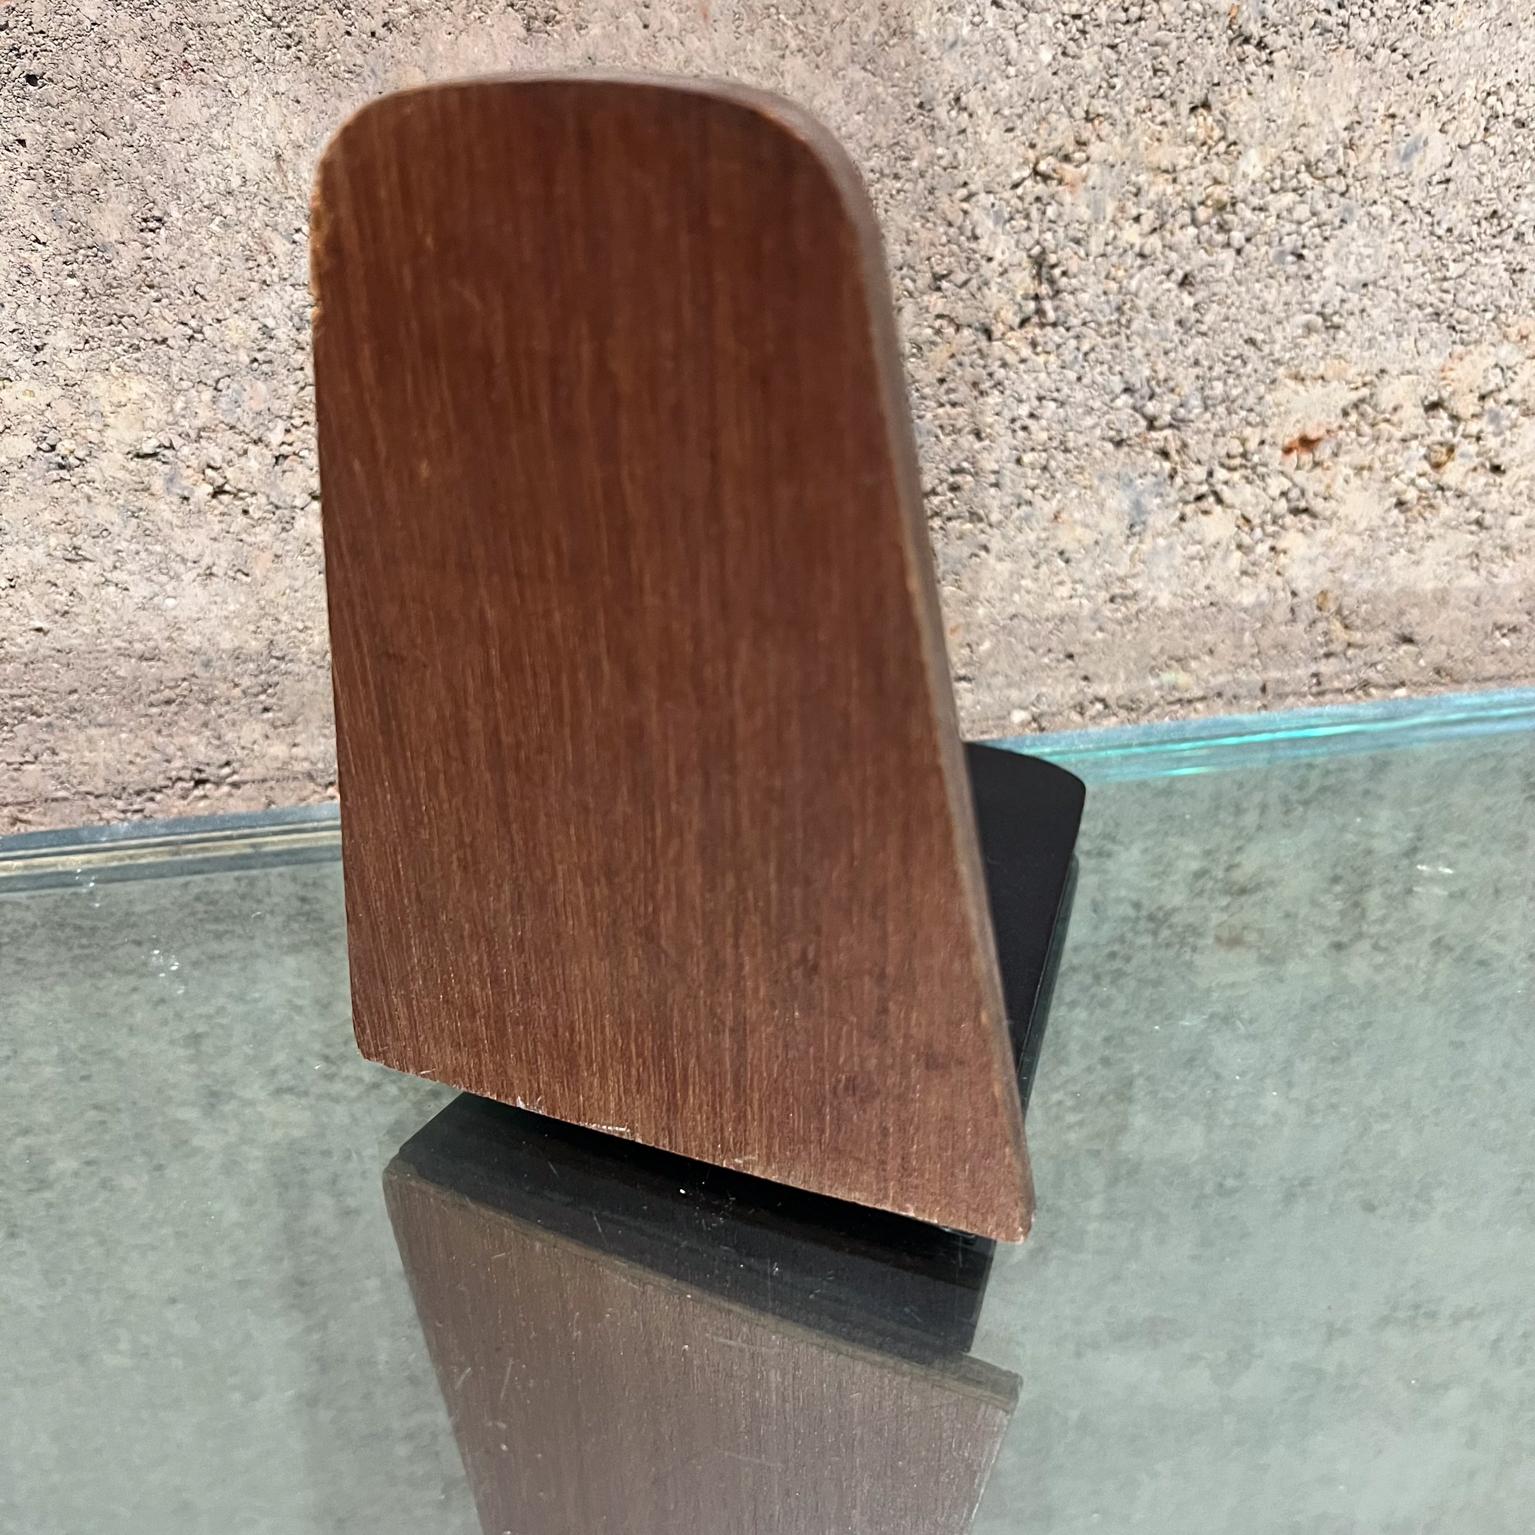 1960s Danish Modern Single Teak Wood Bookend
5.25 h x 5.25 d x 4 w
Unrestored preowned original vintage condition
Wear is present
Refer to all images for condition.